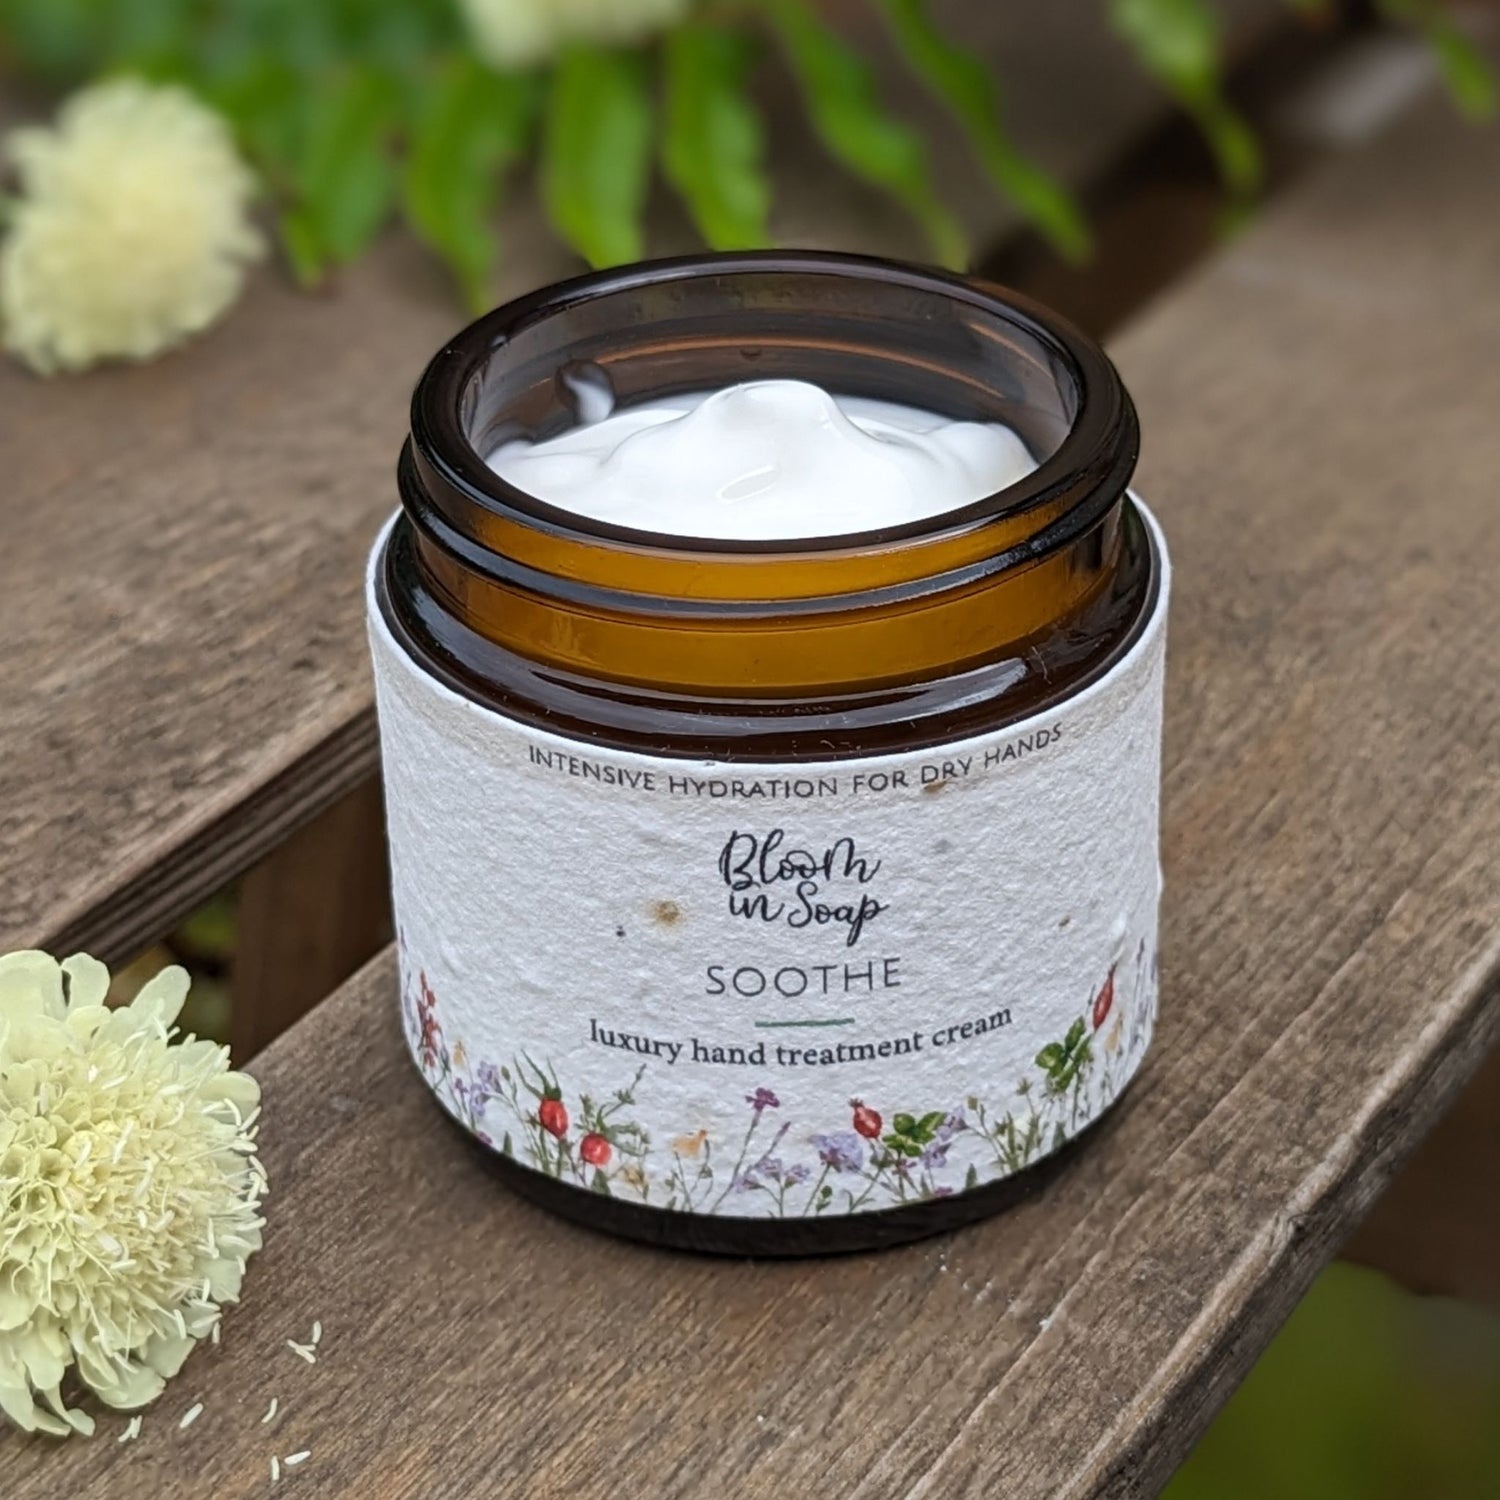 Soothe hand cream from Bloom In Soap